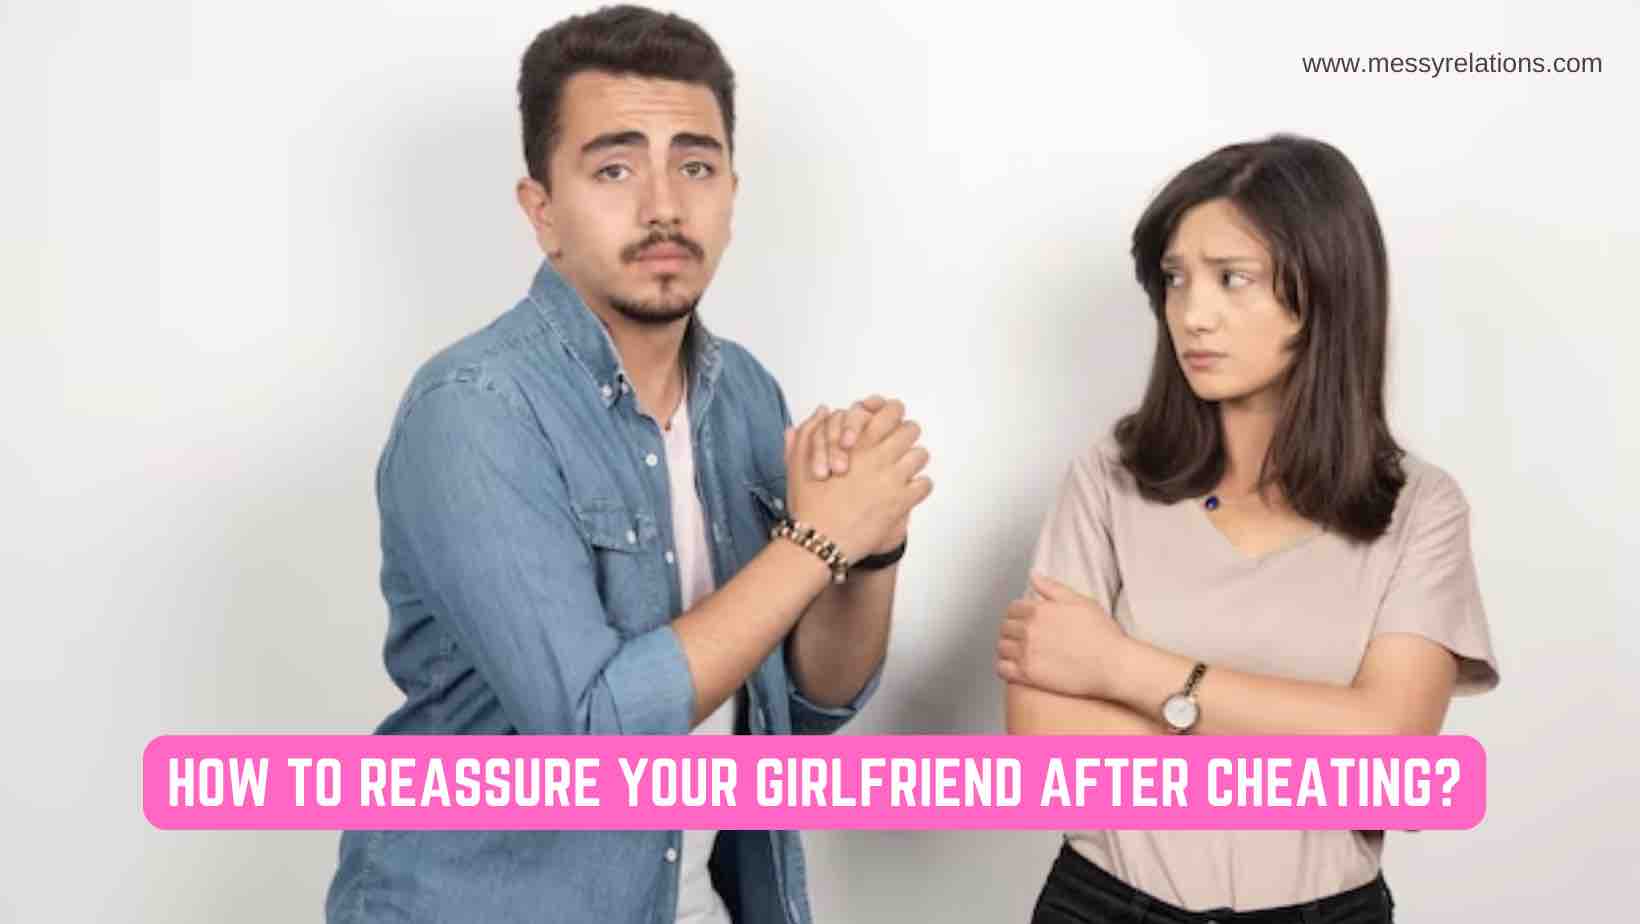 How to Reassure Your Girlfriend After Cheating?